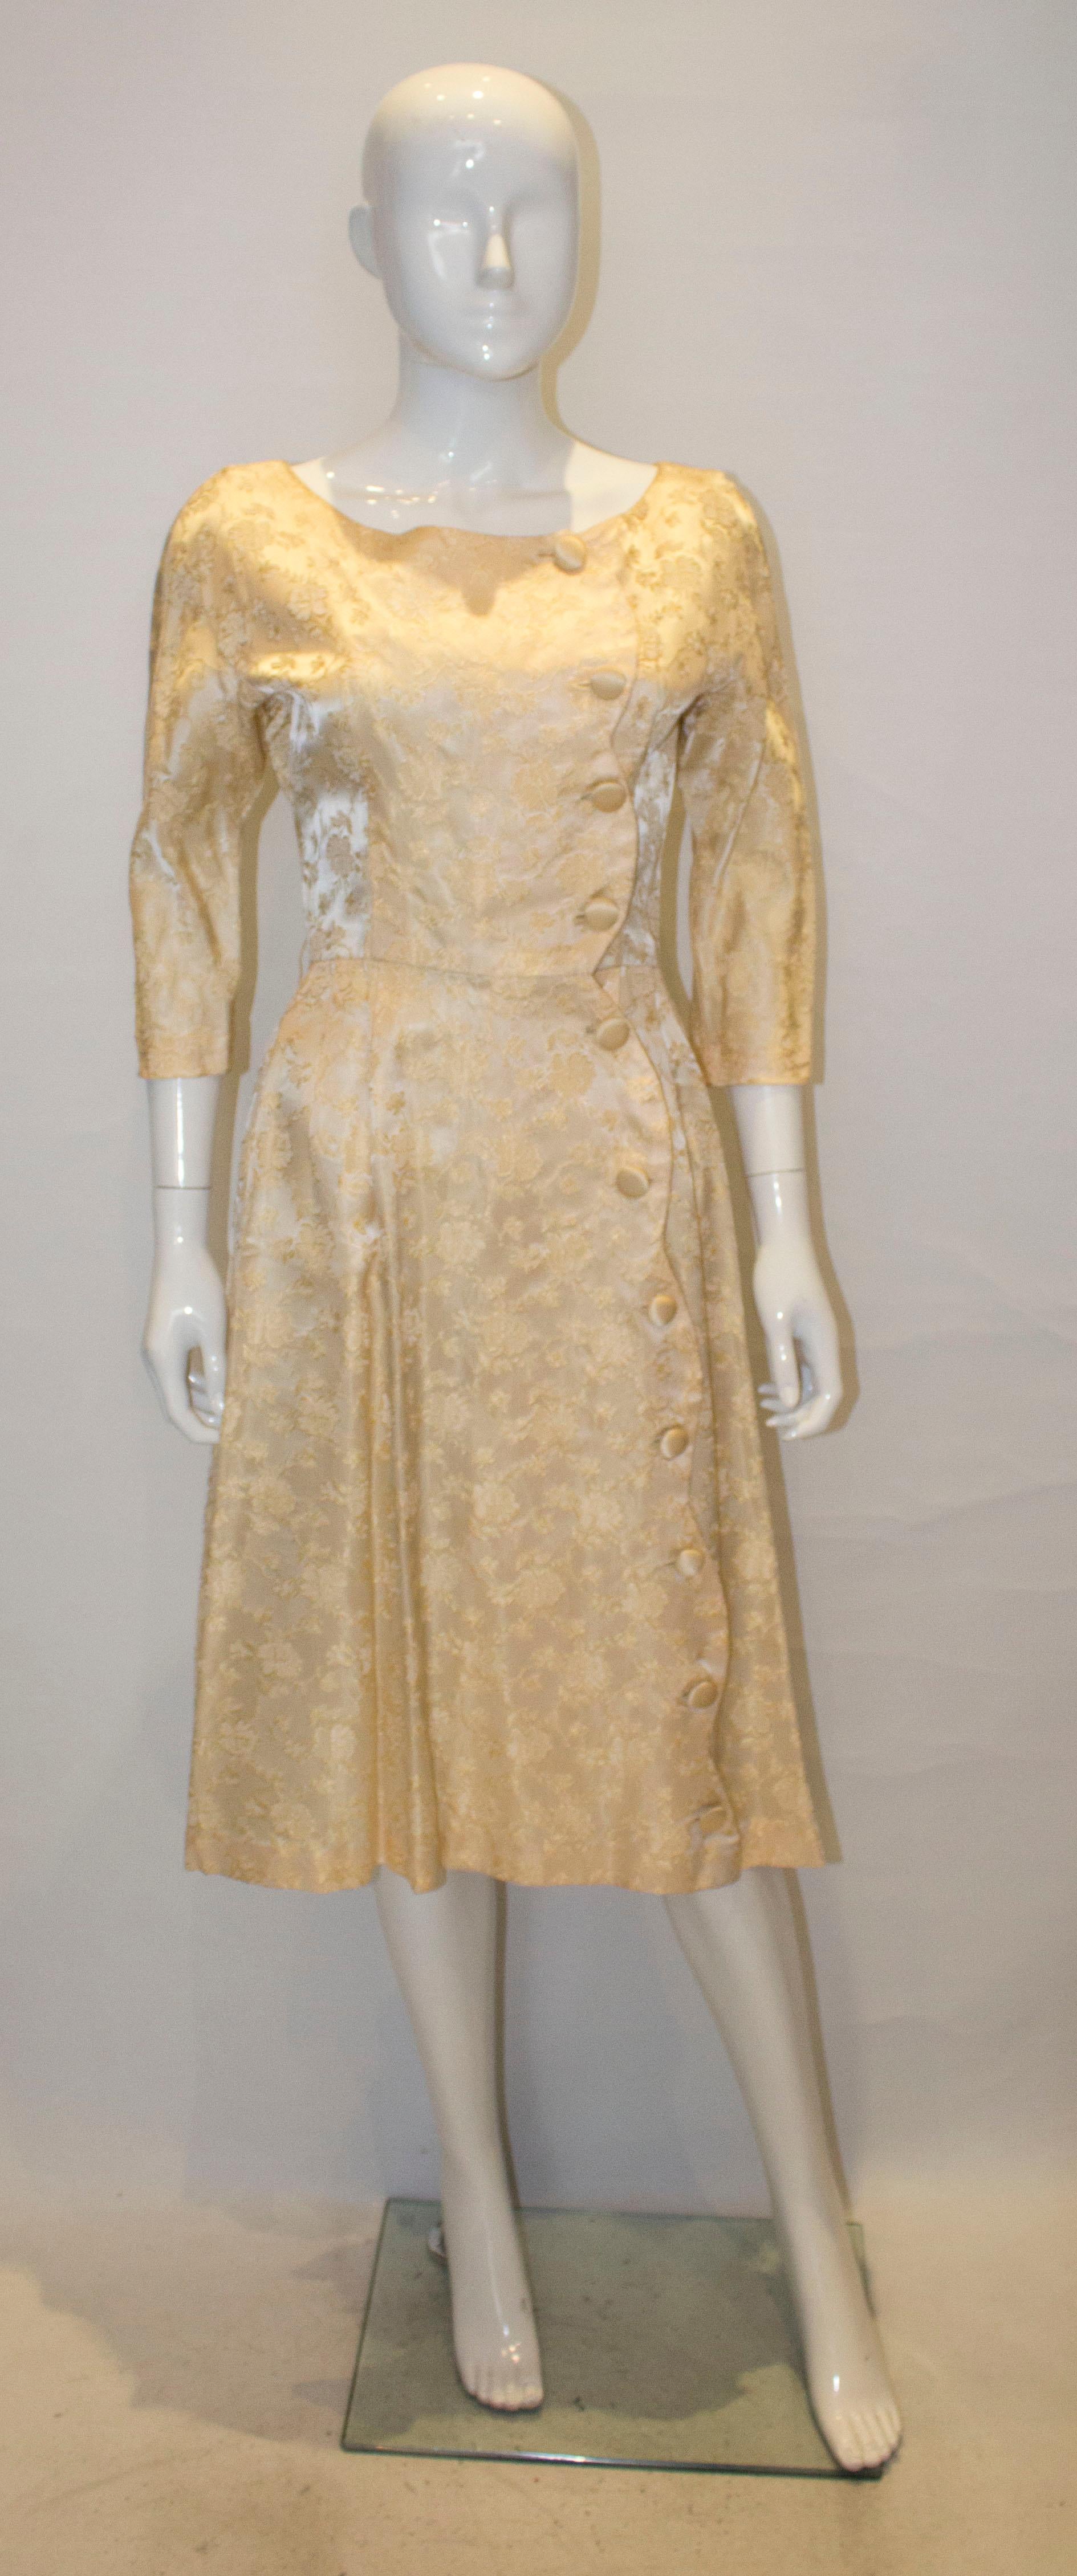 A pretty soft gold colour vintage brocade cocktail dress. The dress has a scallop edge opening with button fastenings. It has elbow length sleaves  and gathering at the back.